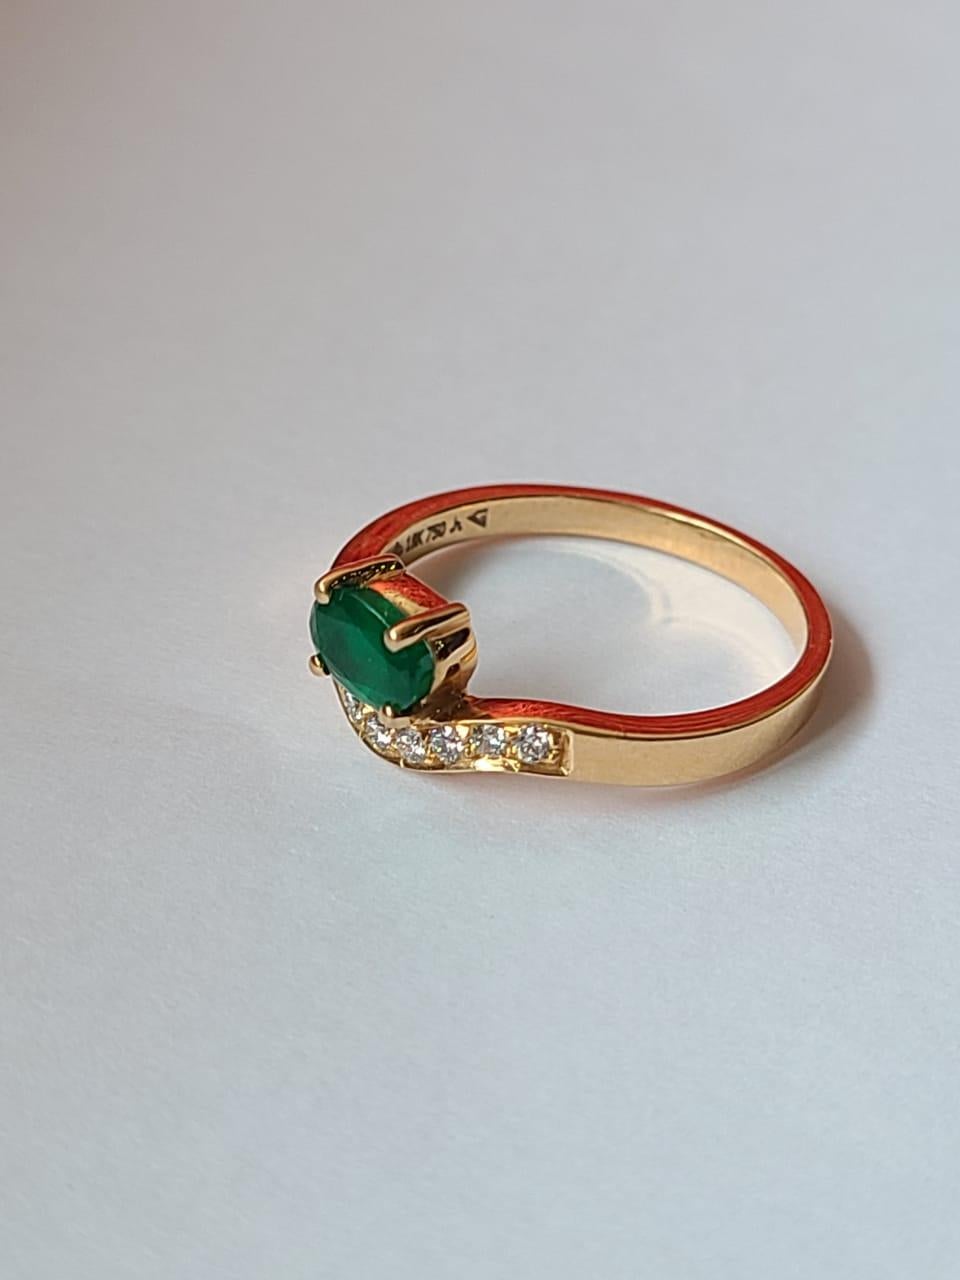 Art Deco Natural Zambian Emerald & Diamonds Engagement / Wedding Ring Set in 18K Gold For Sale